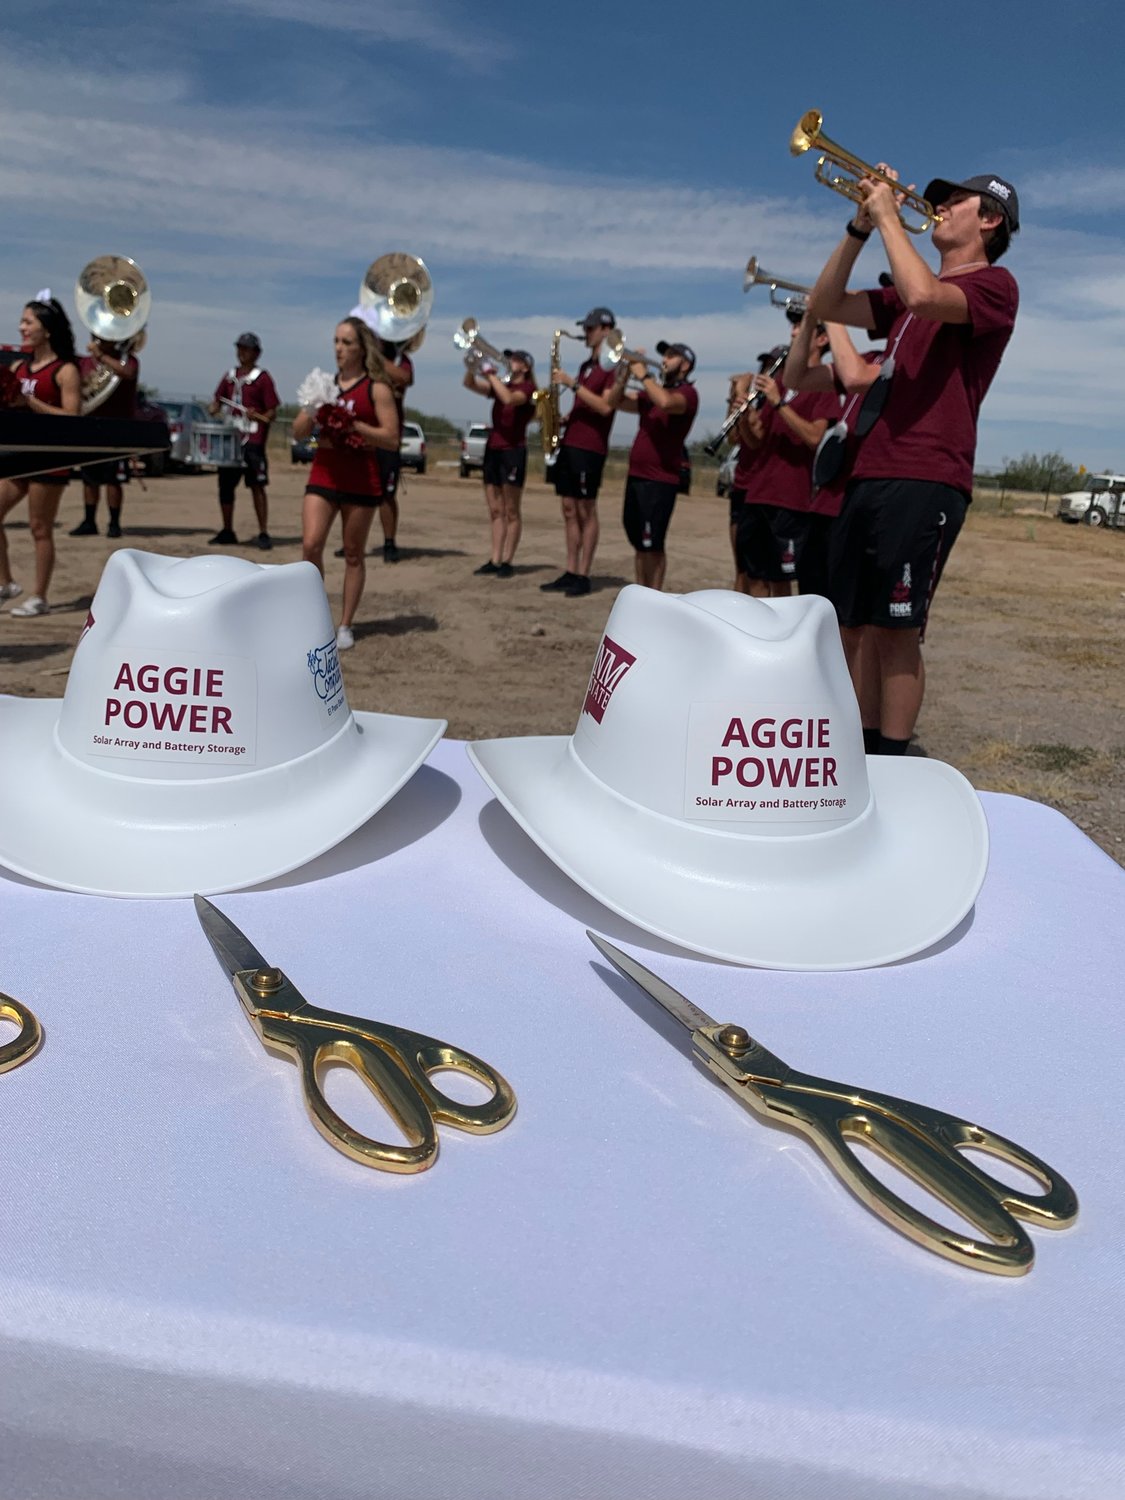 New Mexico State University’s Pride Band introduces preparations to cut the ribbon at Aggie Power located at Arrowhead Research Park on Thursday, Sept. 23.